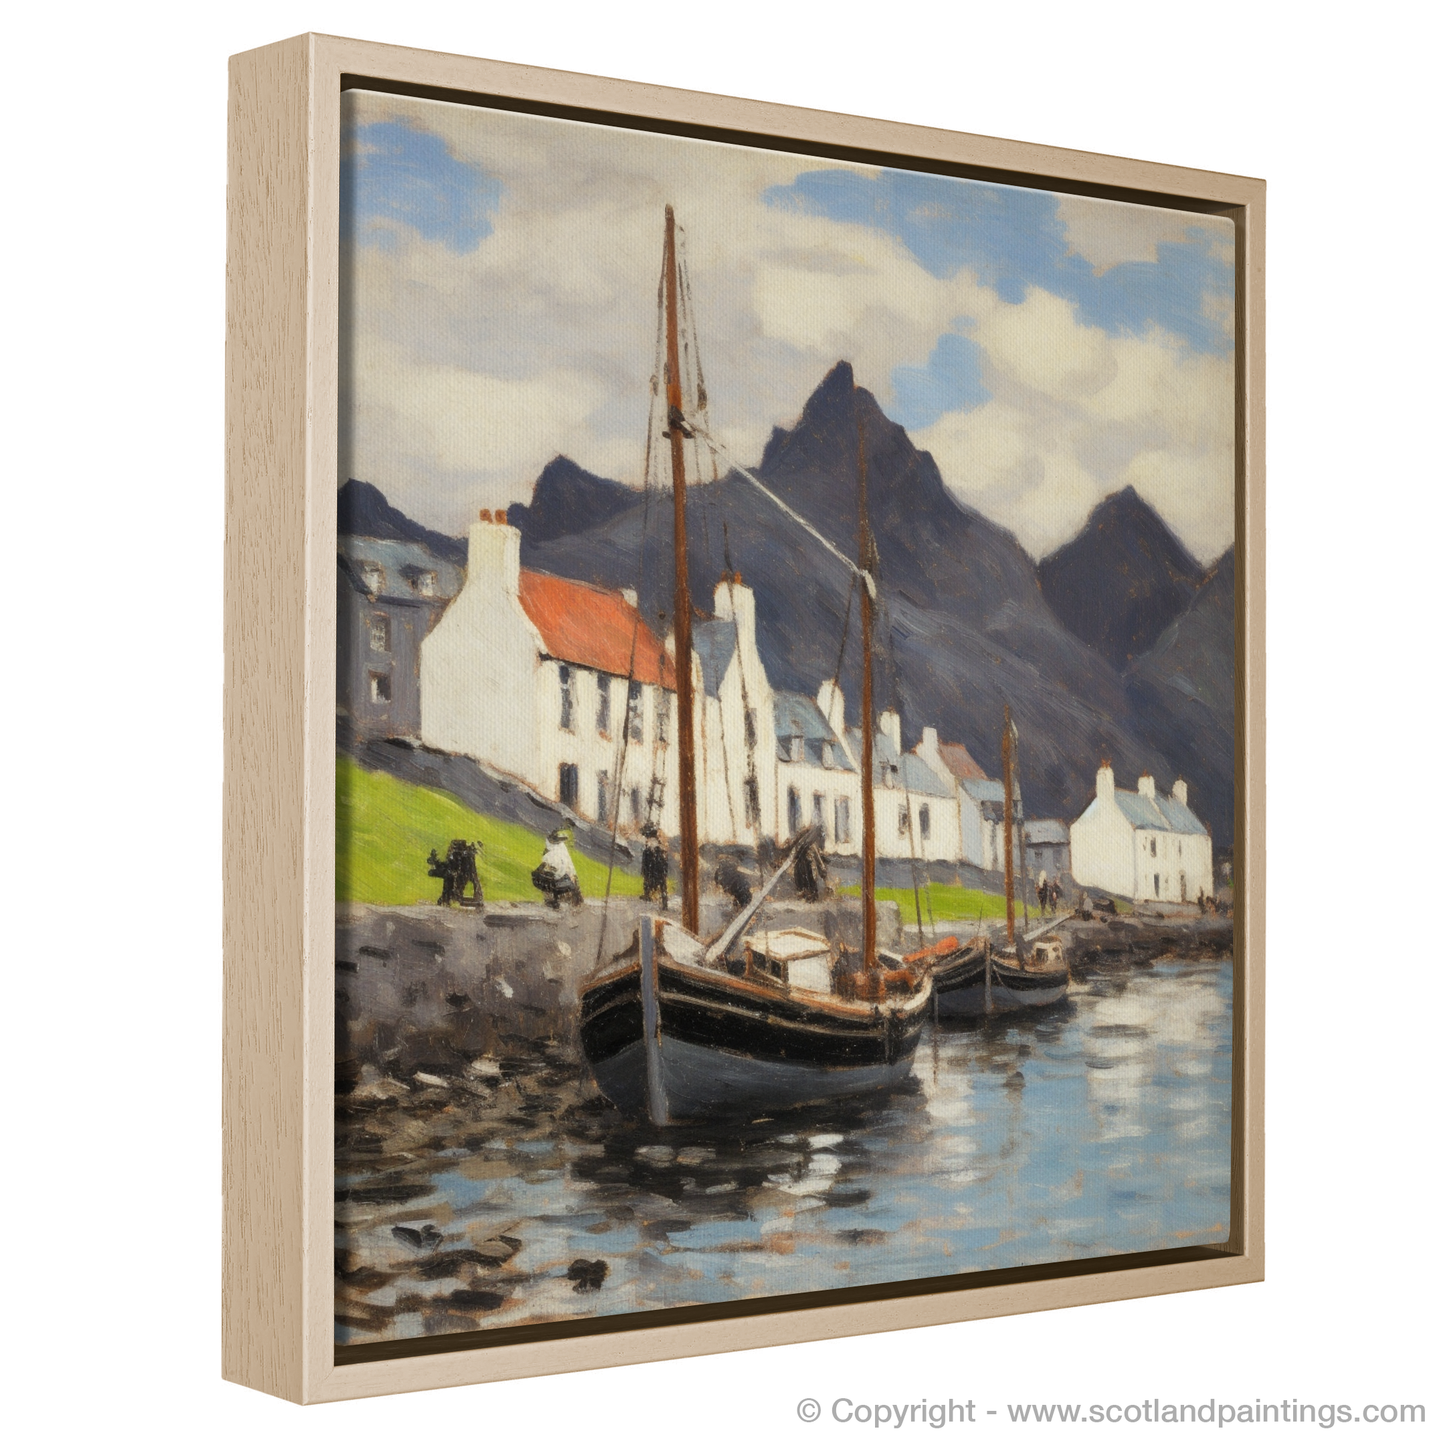 Harbour Serenity: An Impression of Portree Isle